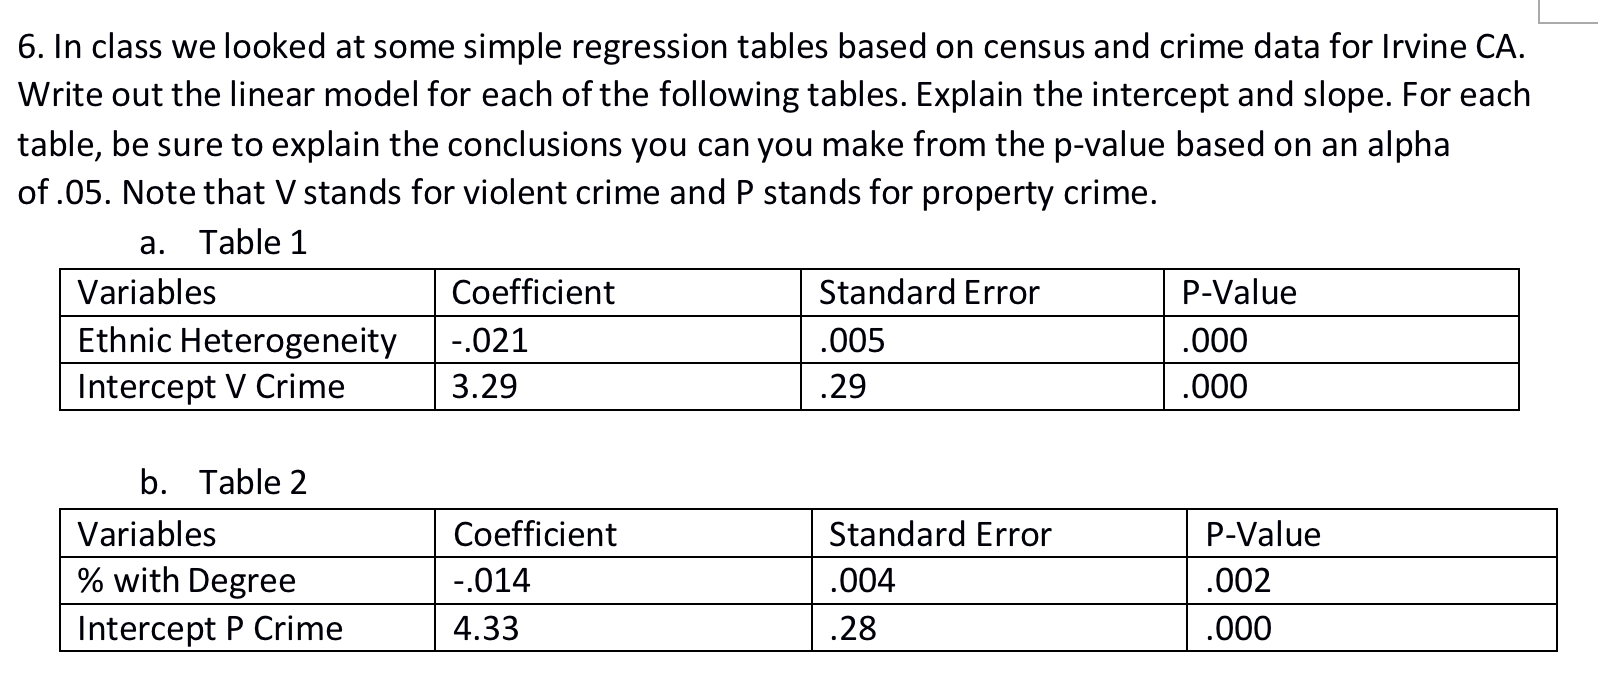 6 In Class We Looked At Some Simple Regression Tables Based On Census And Crime Data For Irvine Ca Write Out The Linea 1